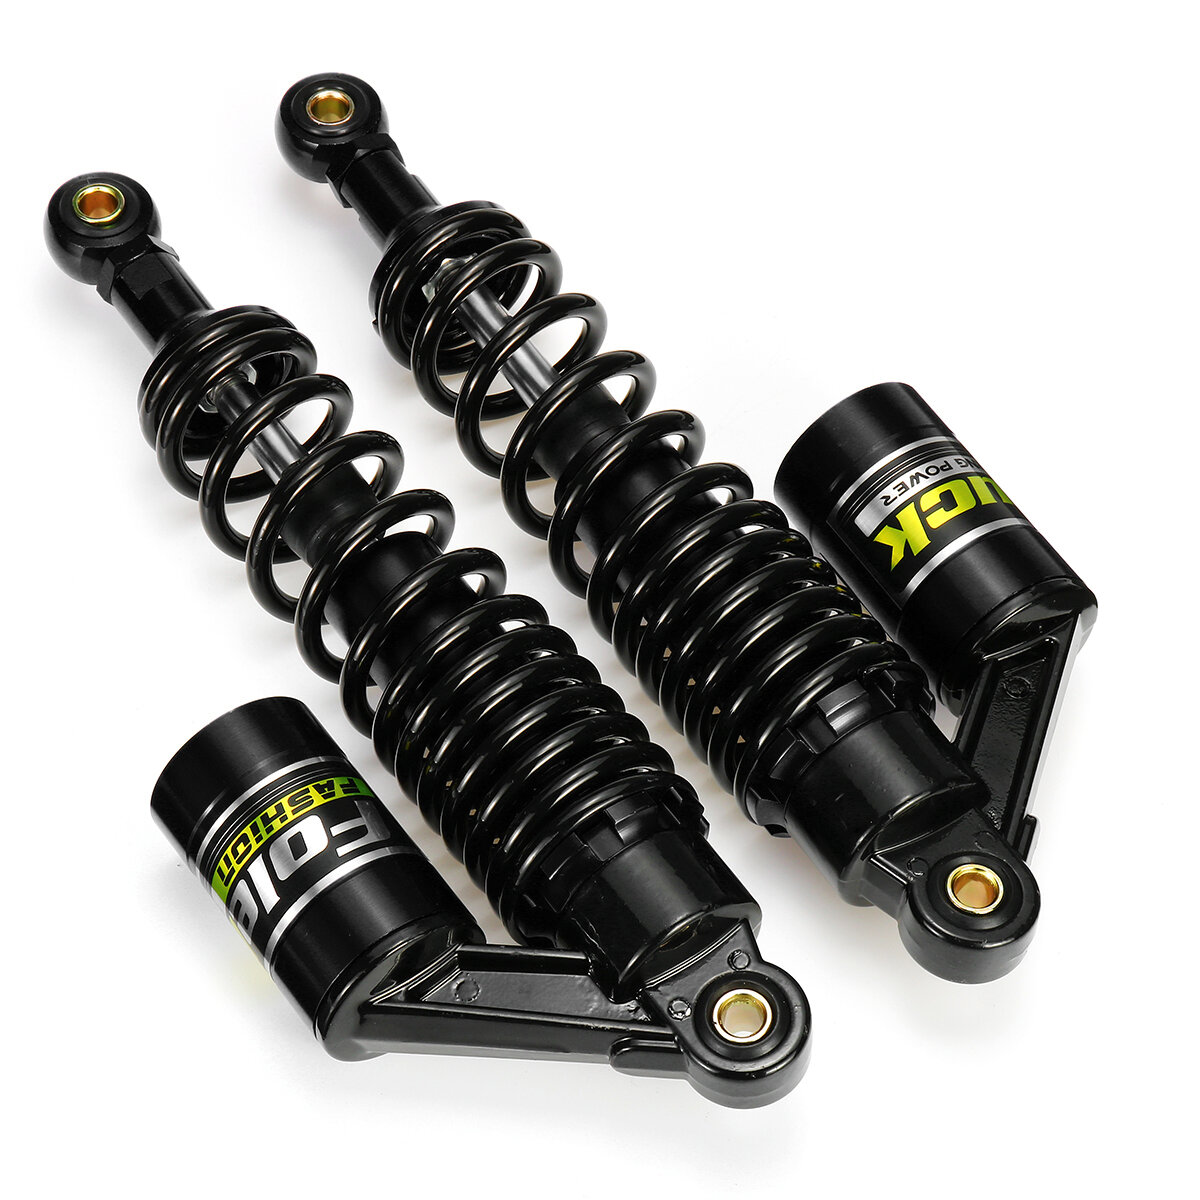 

320mm/12.5" Universal Motorcycle Air Shock Absorber Rear Suspension For Yamaha Motor Scooter ATV Quad Dirt Bike